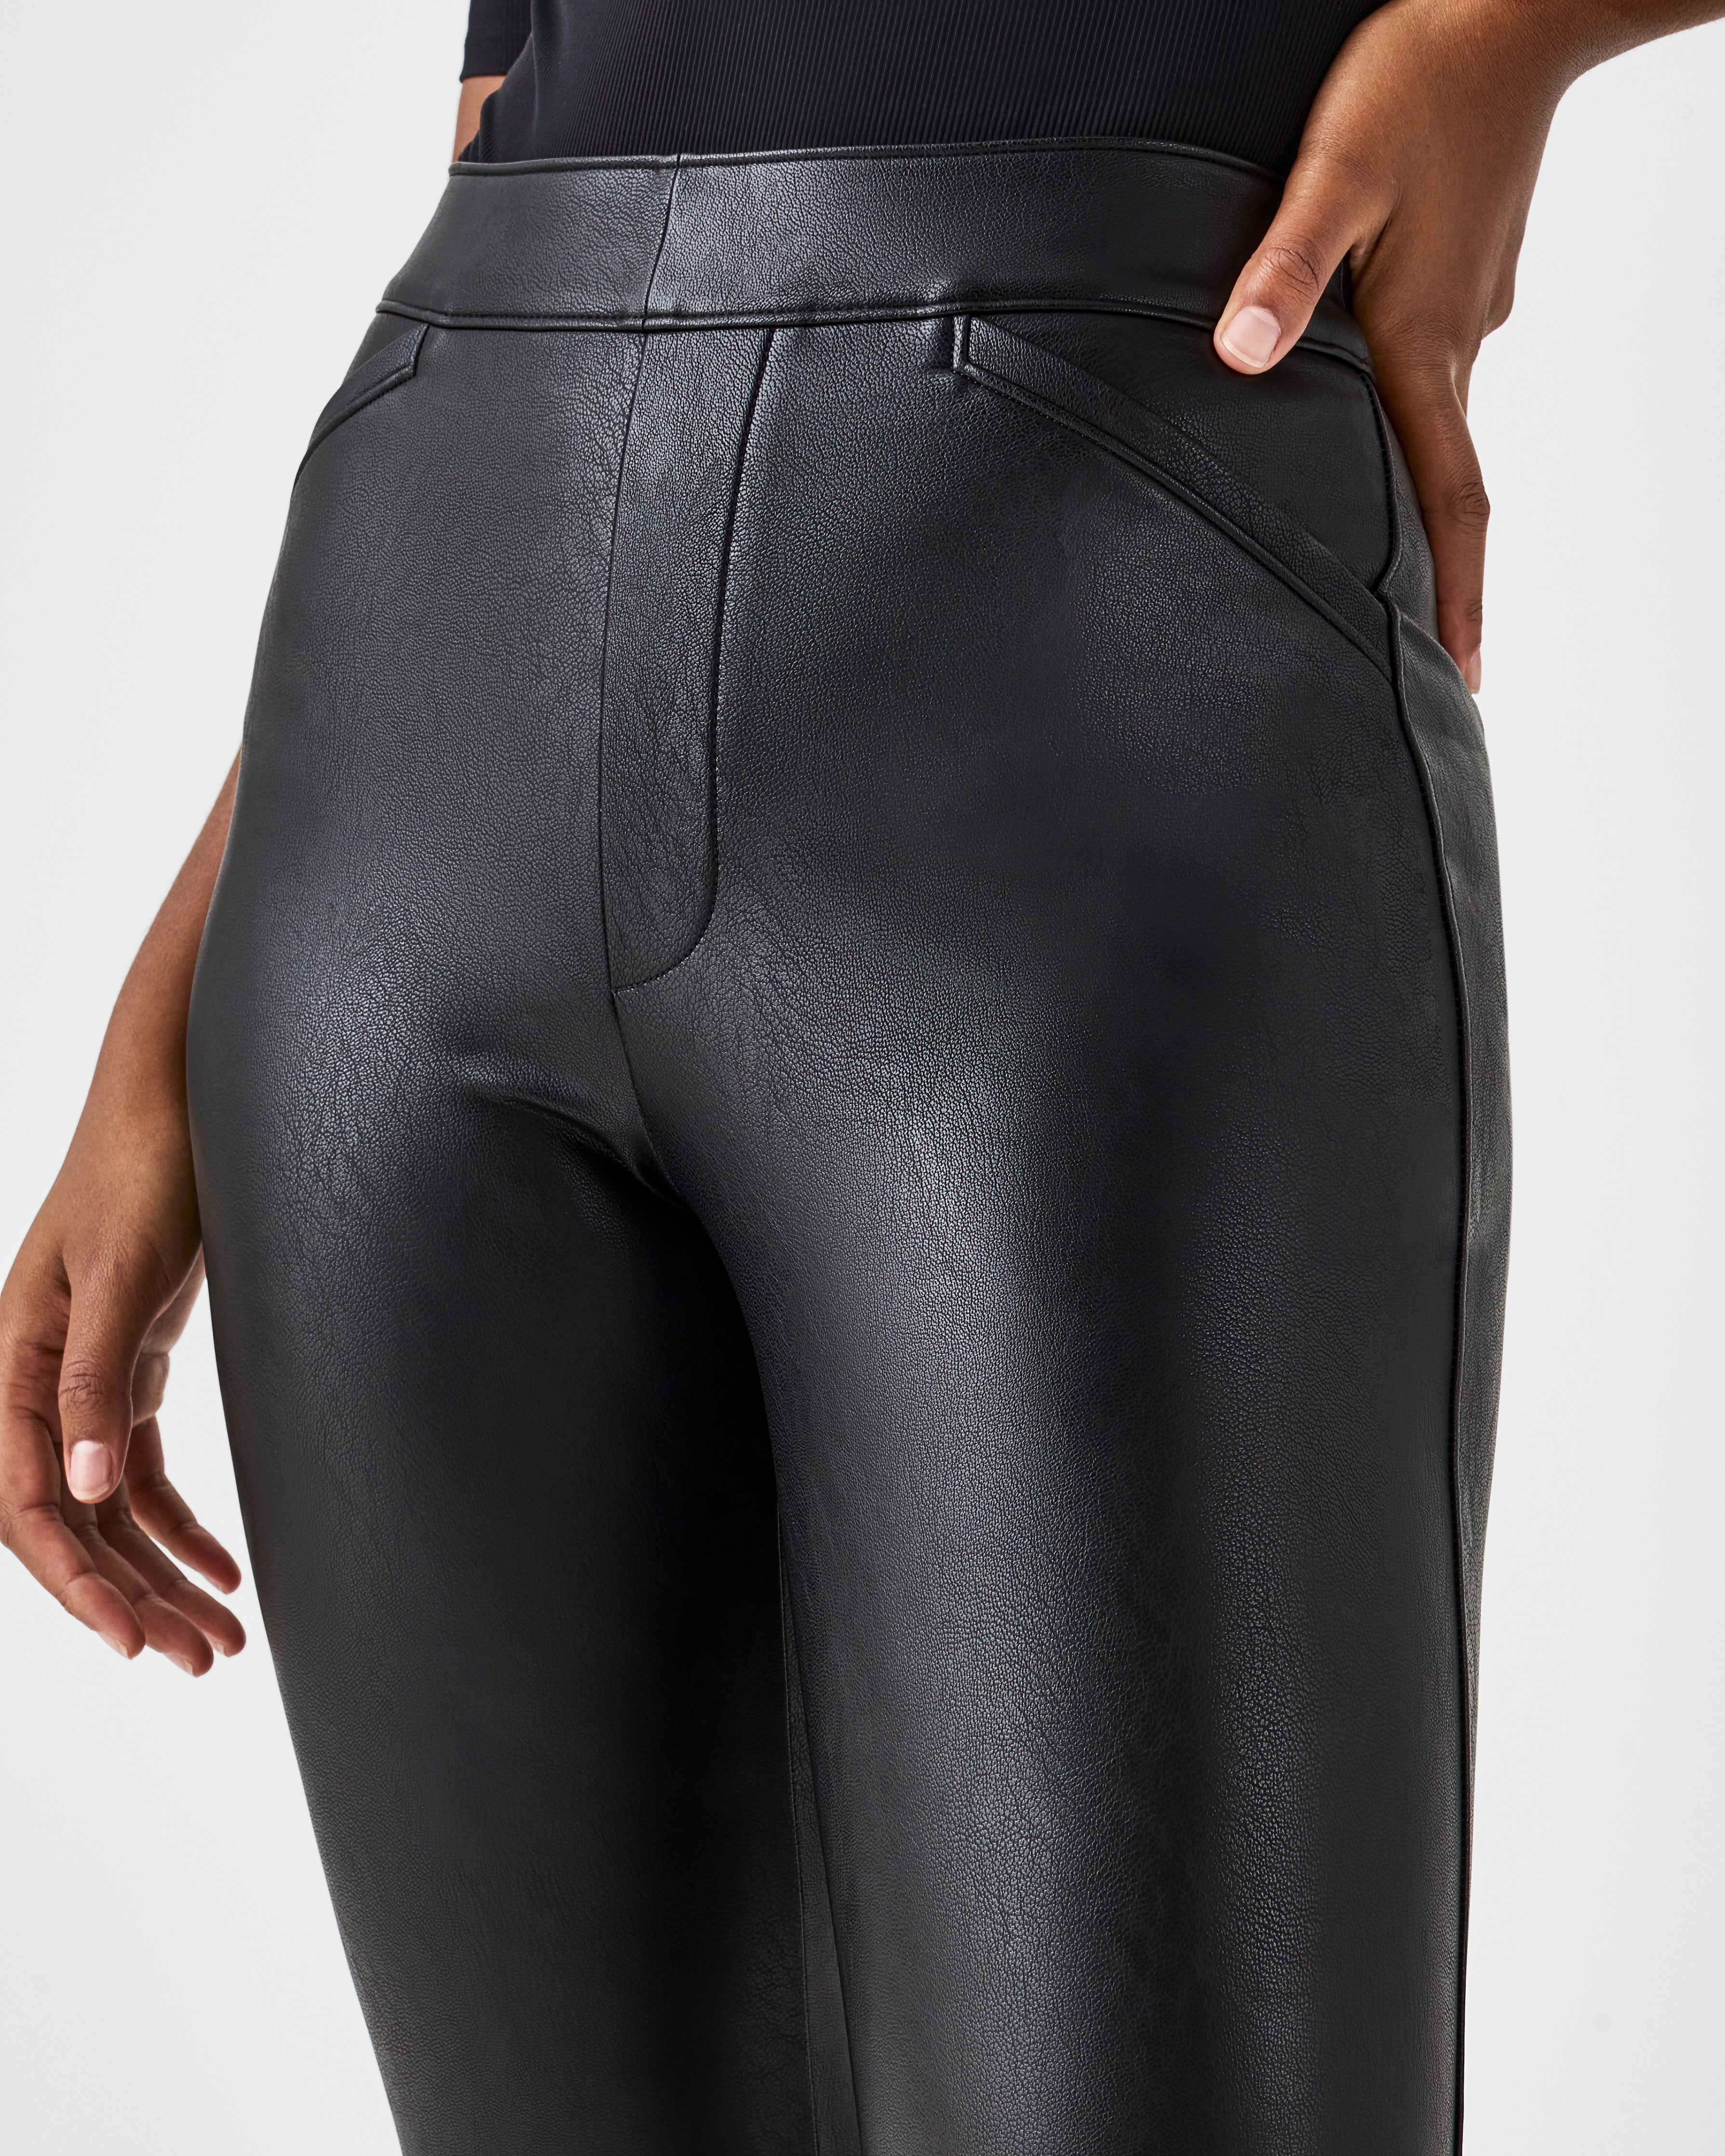 Pleather Yoga Pants That Are Better Than Spanx- Best Faux Leather